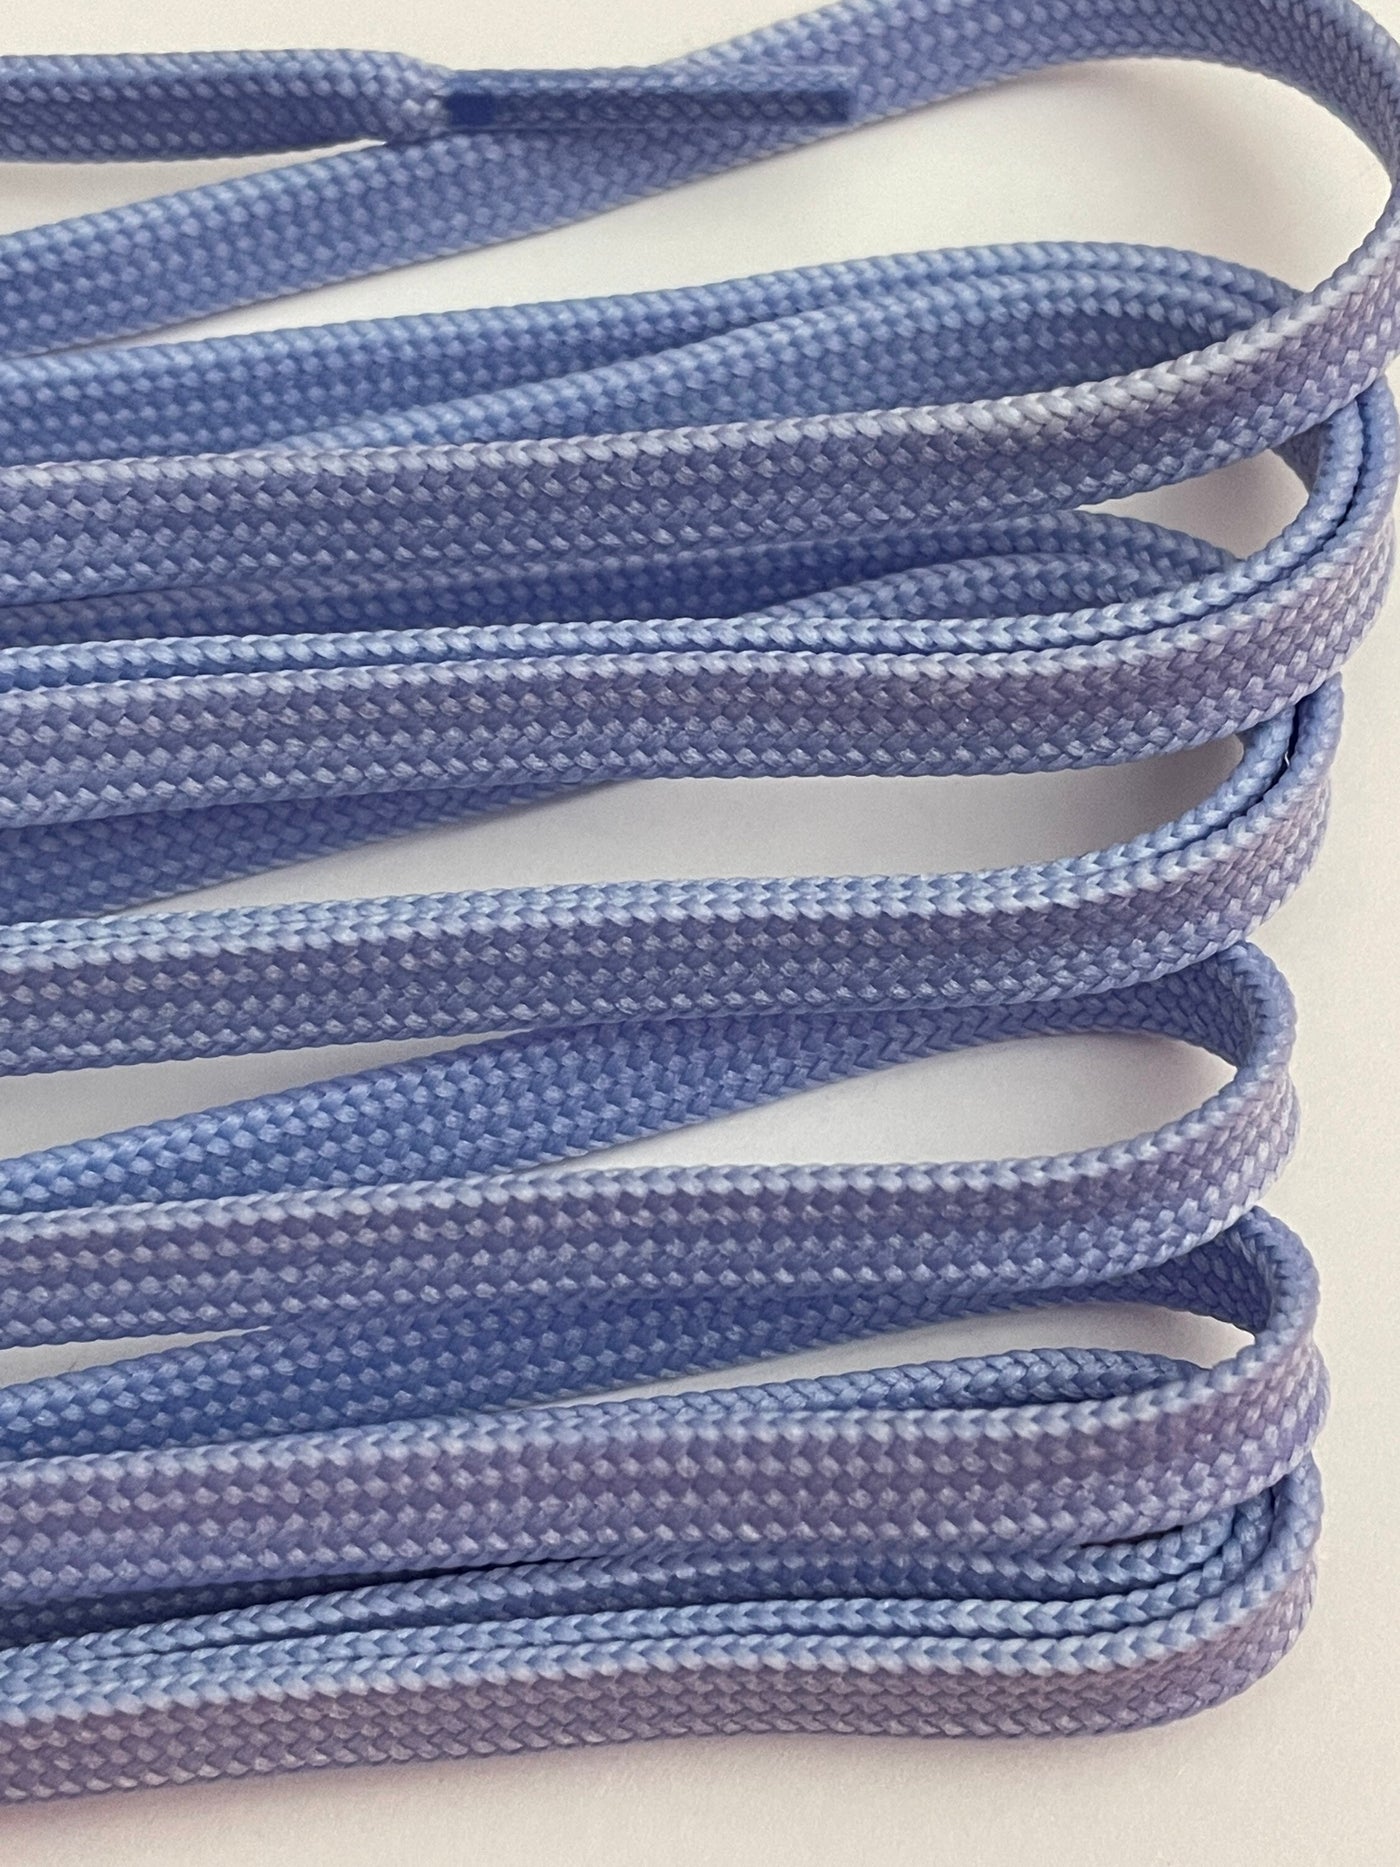 Periwinkle 96 inch CORE Roller Skate Laces (Narrow 6mm)